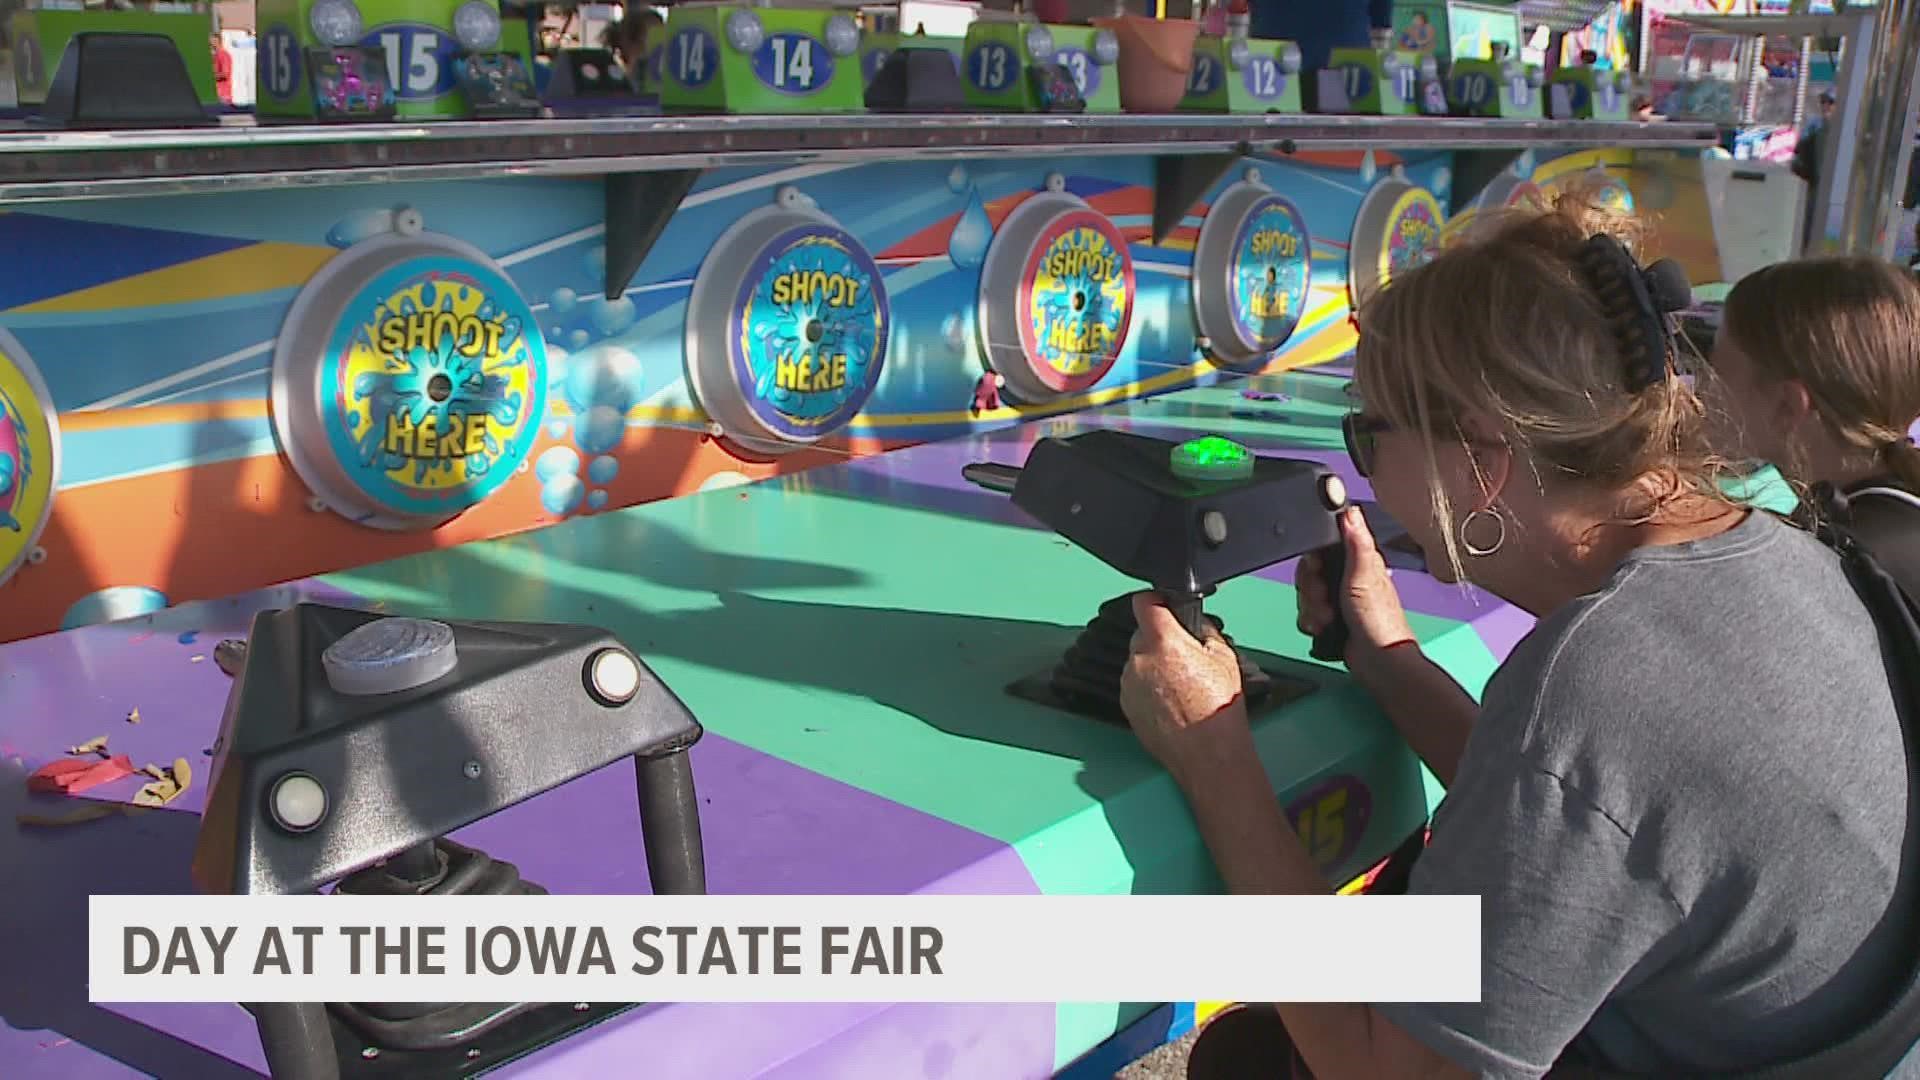 Local5 spent the second day of the fair talking with fairgoers about their favorite parts of the celebration and what to look for this weekend.